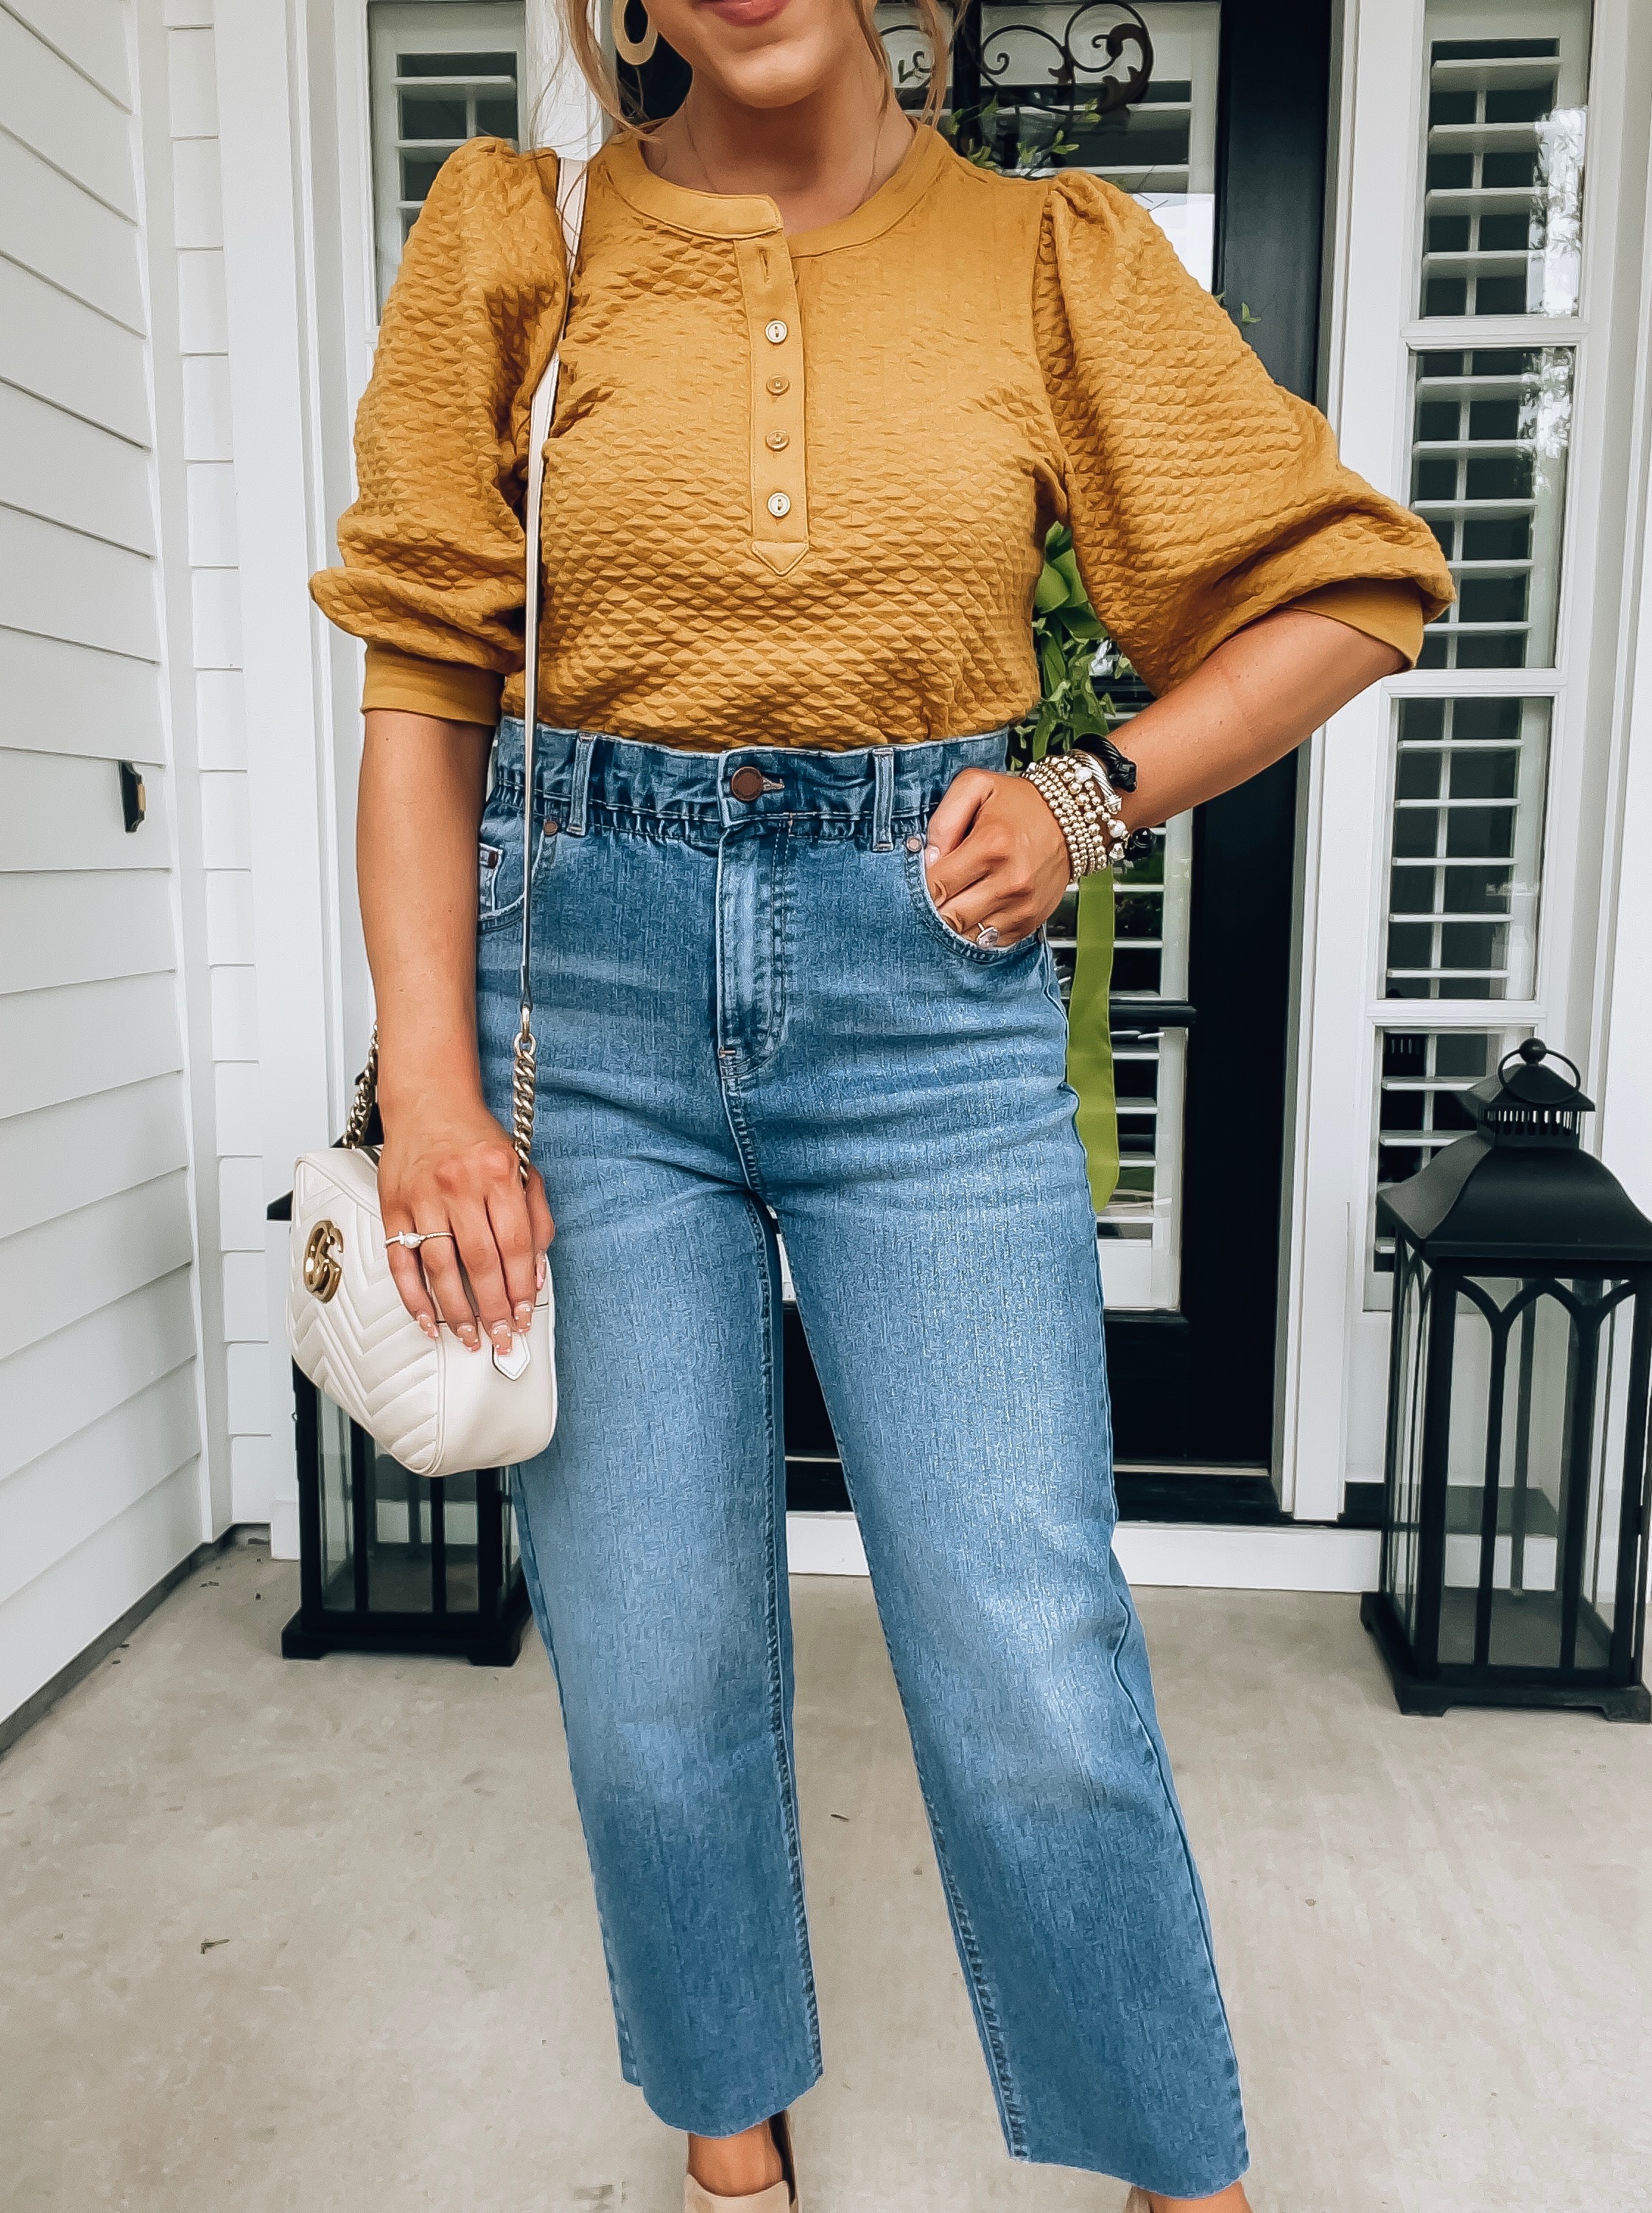 New Walmart Fall Finds - Something Delightful Blog #WalmartFashion #WalmartFinds #AffordableFashion #FallFashion2022